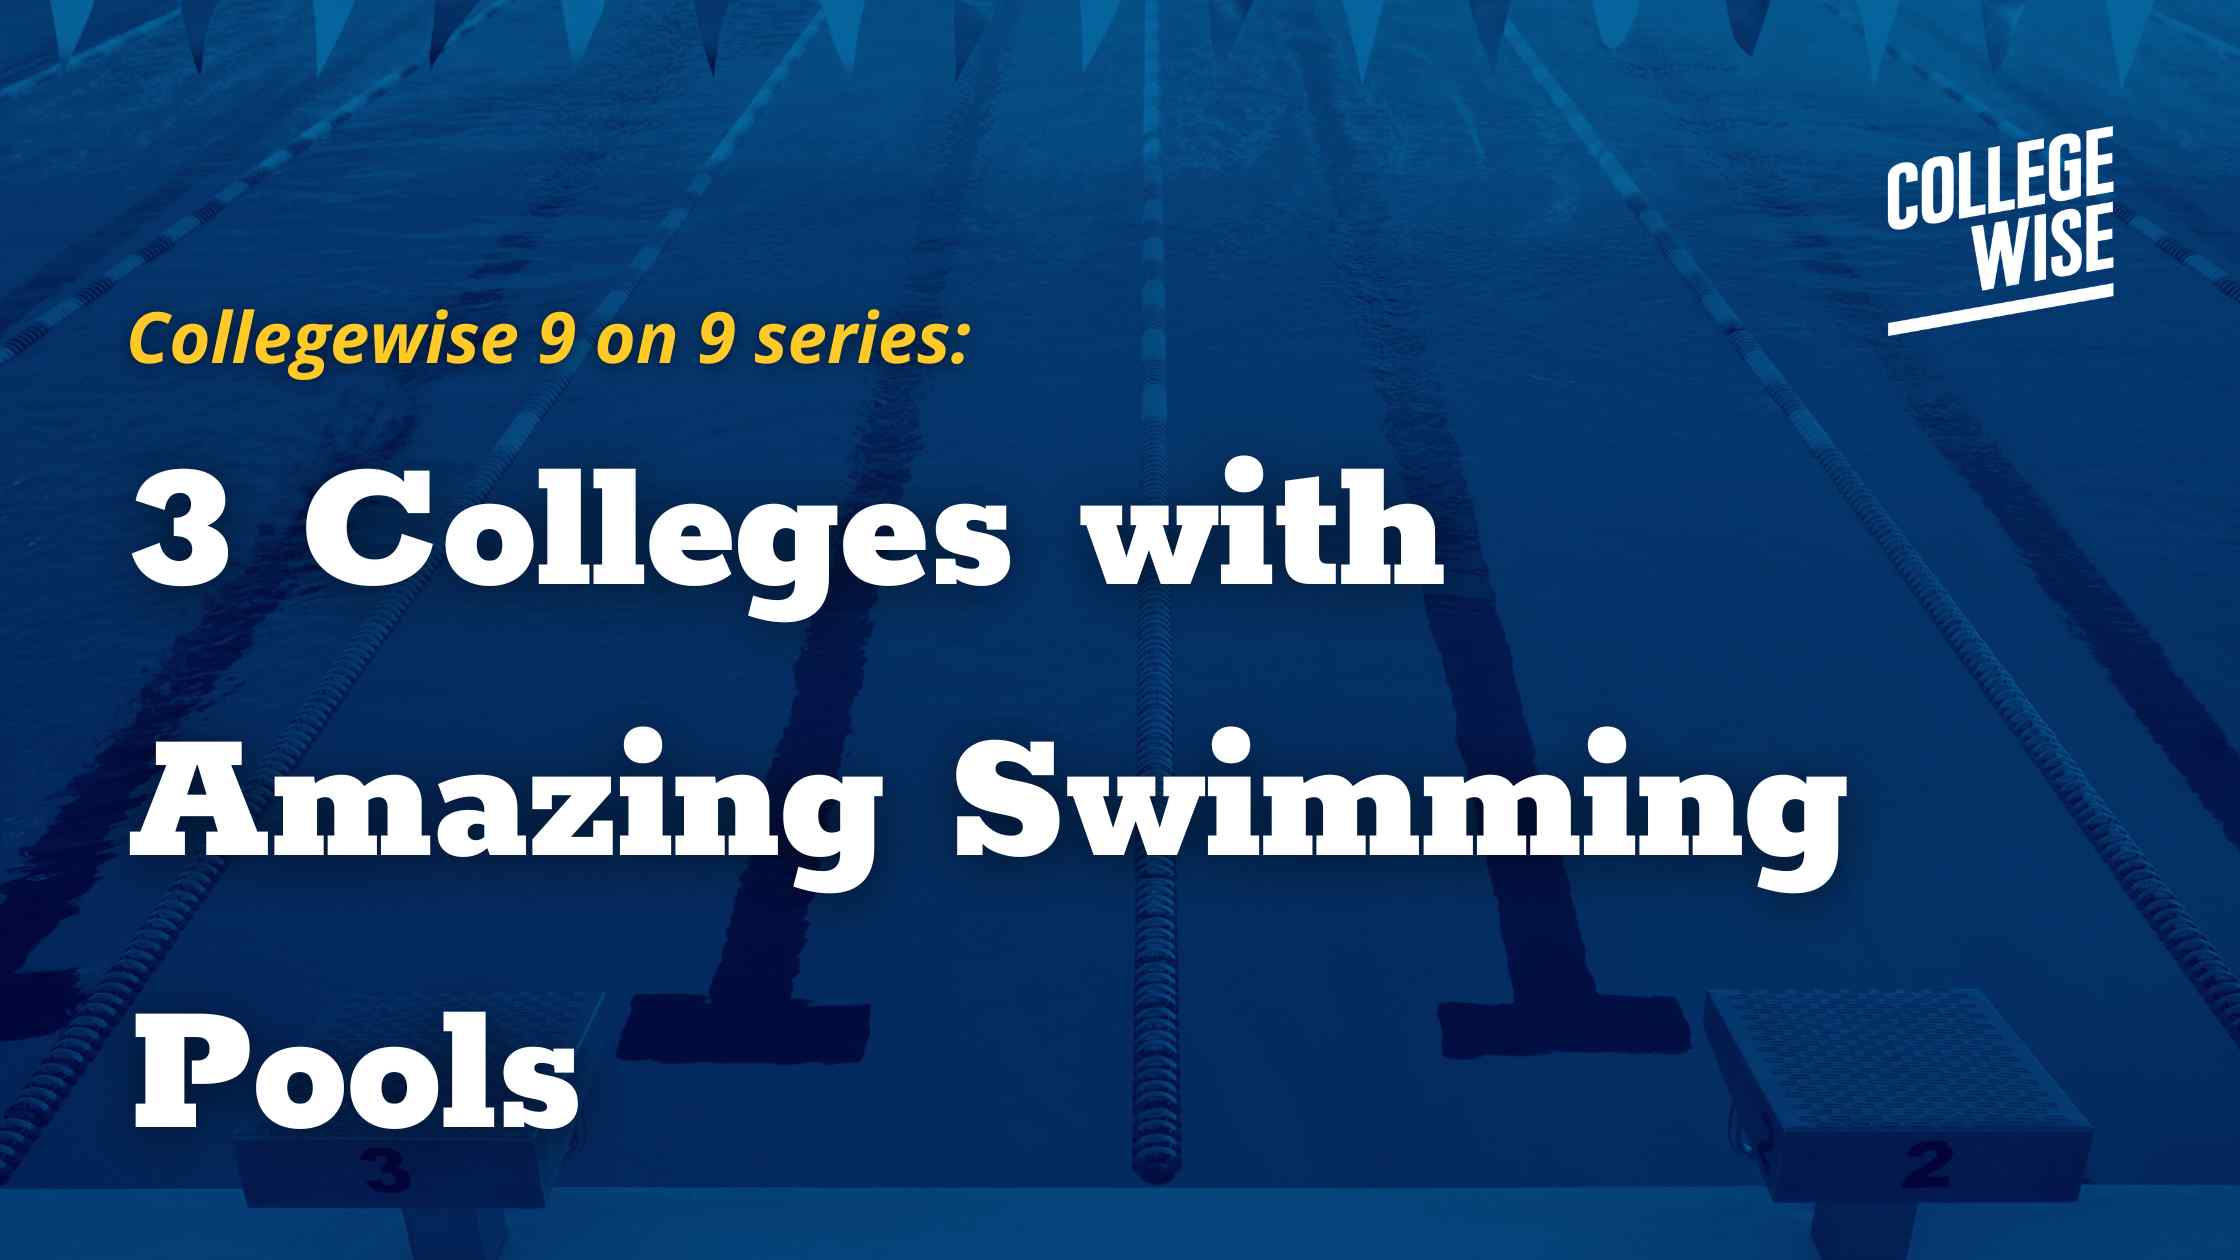 3 Colleges with Amazing Swimming Pools